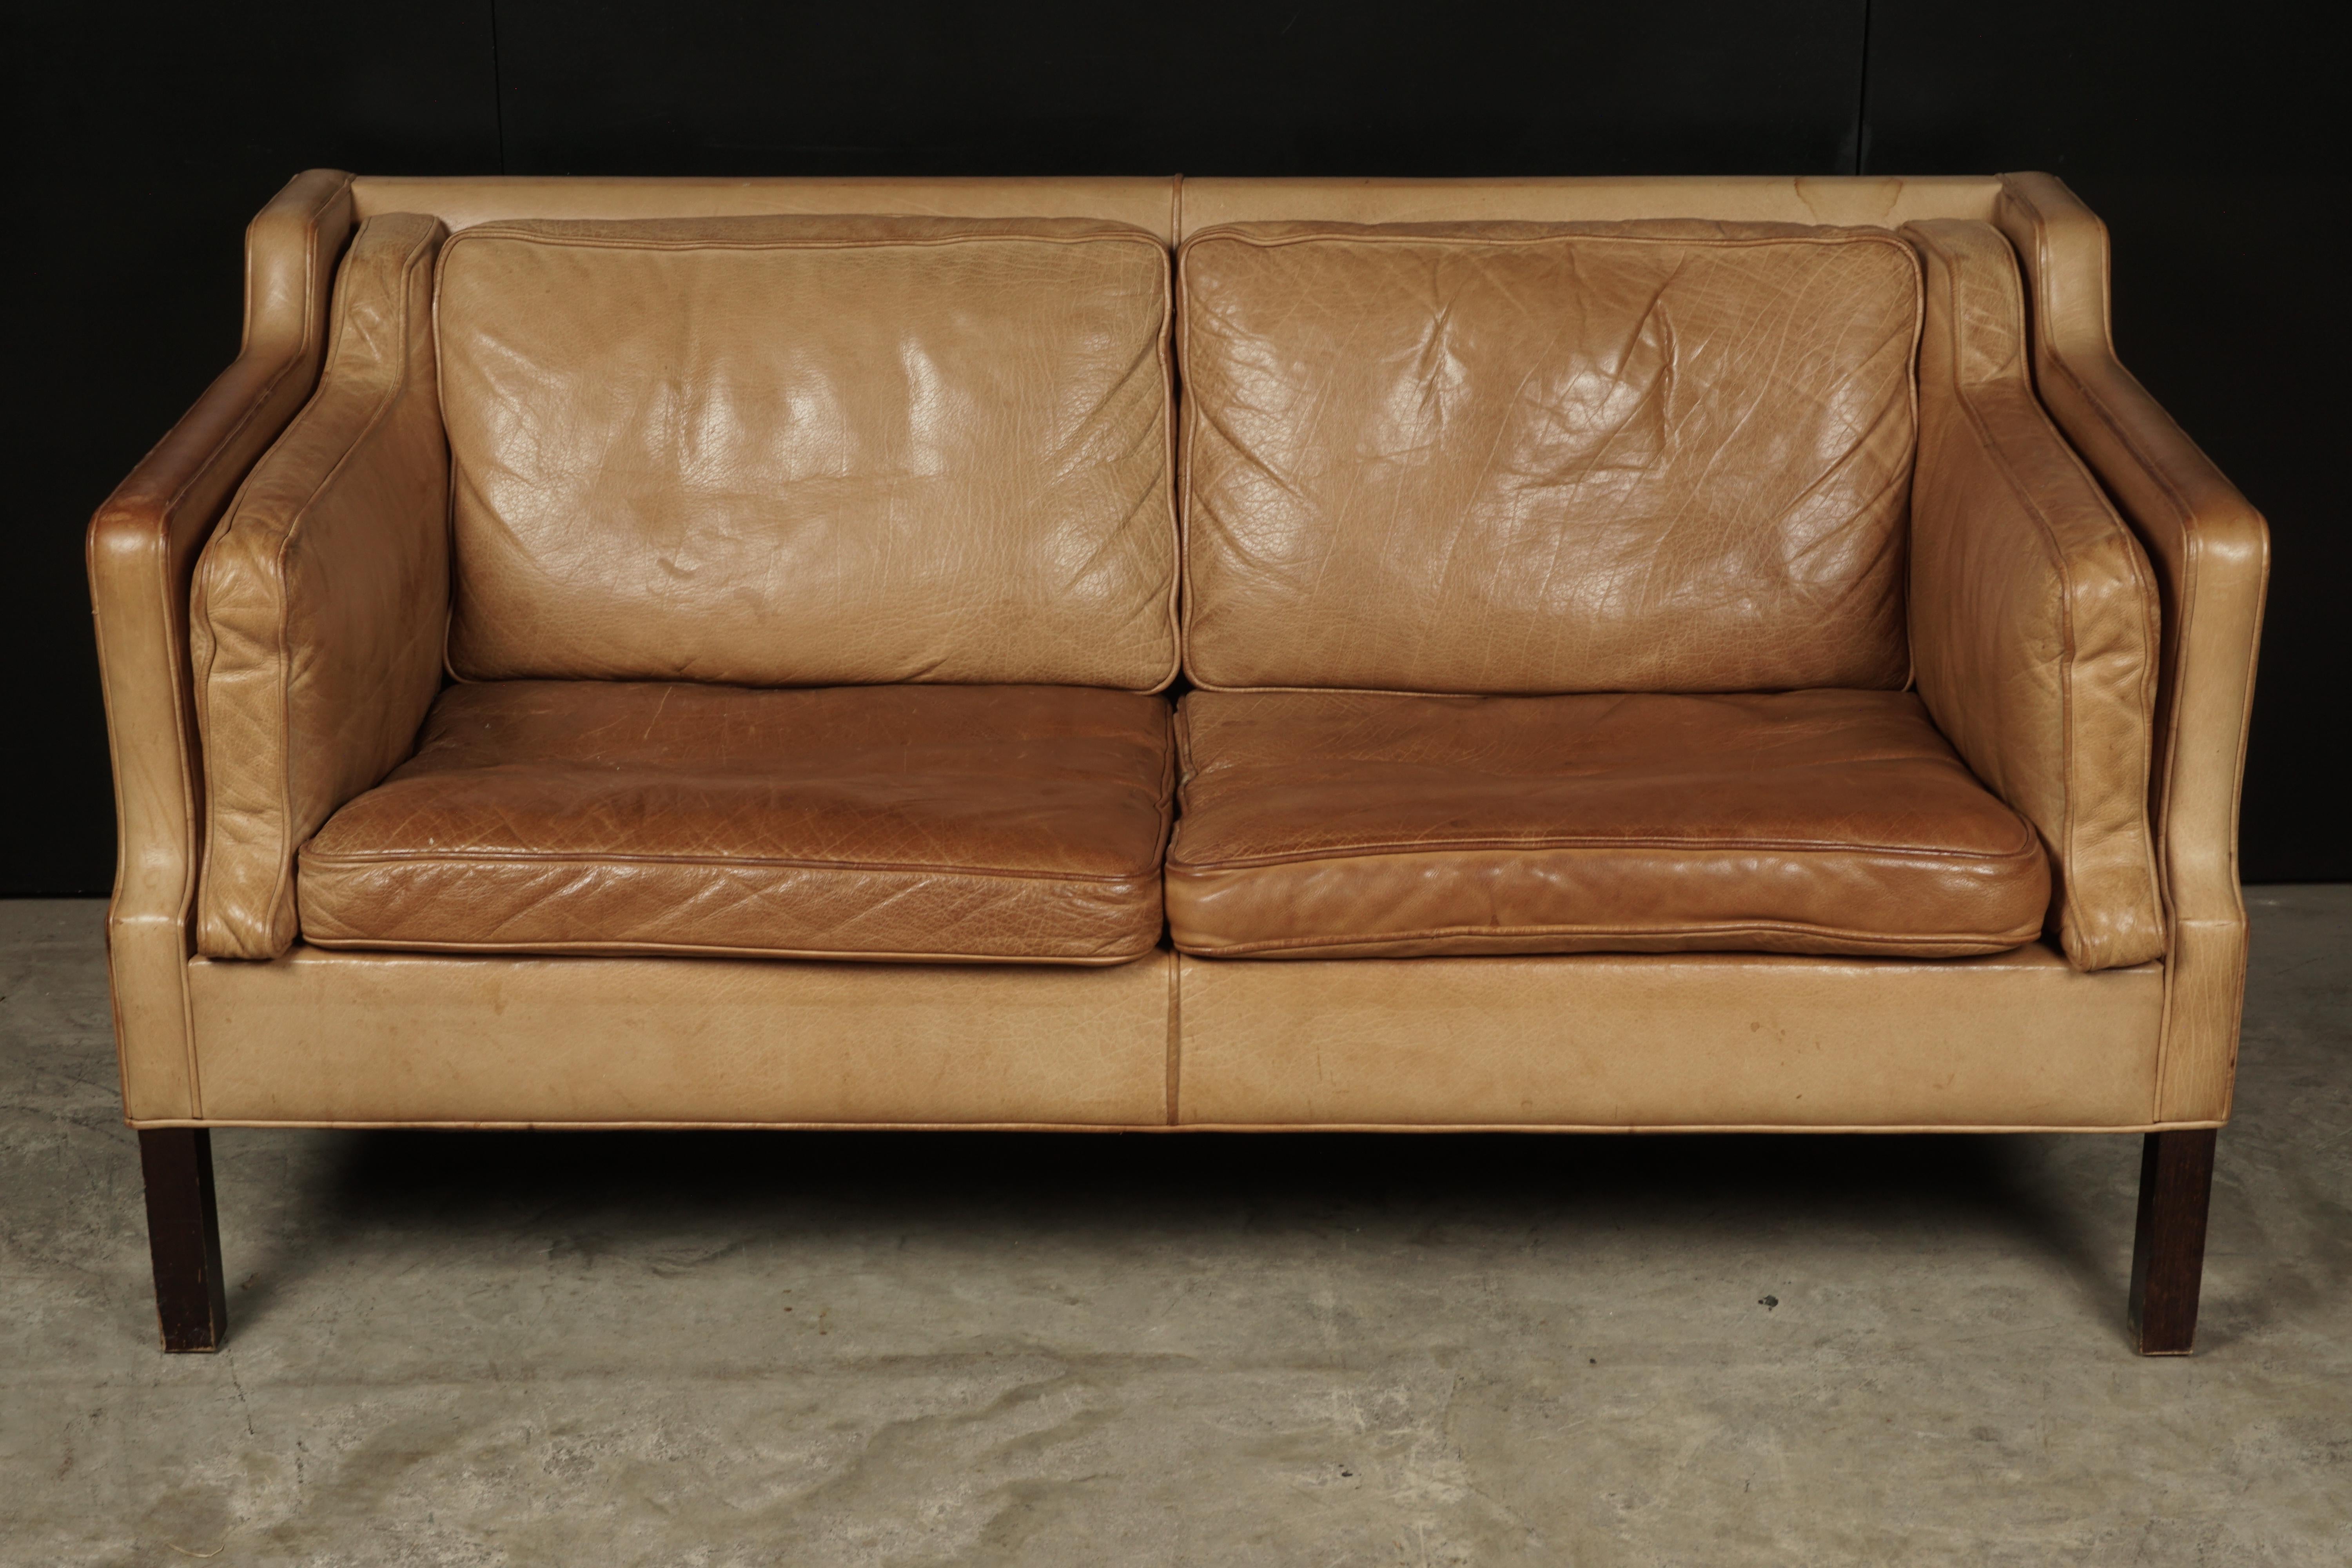 Midcentury two-seat sofa from Denmark, circa 1970. Original tan leather upholstery with nice patina and wear.